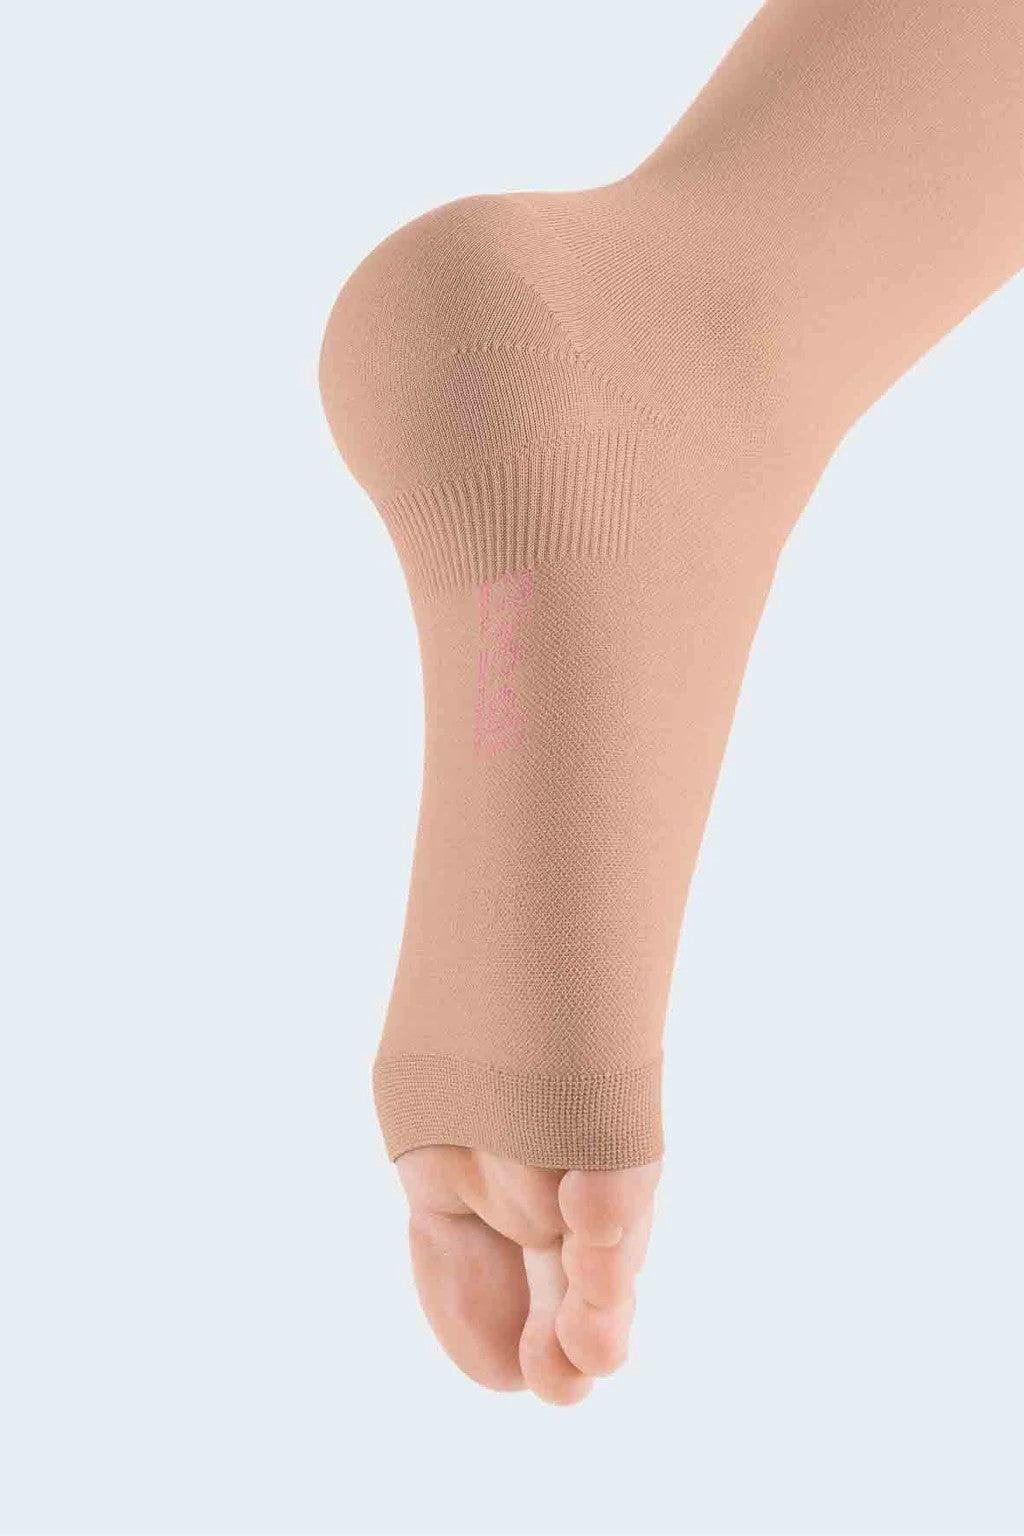 Medi Duomed Open-Toe Pantyhose Compression Stockings